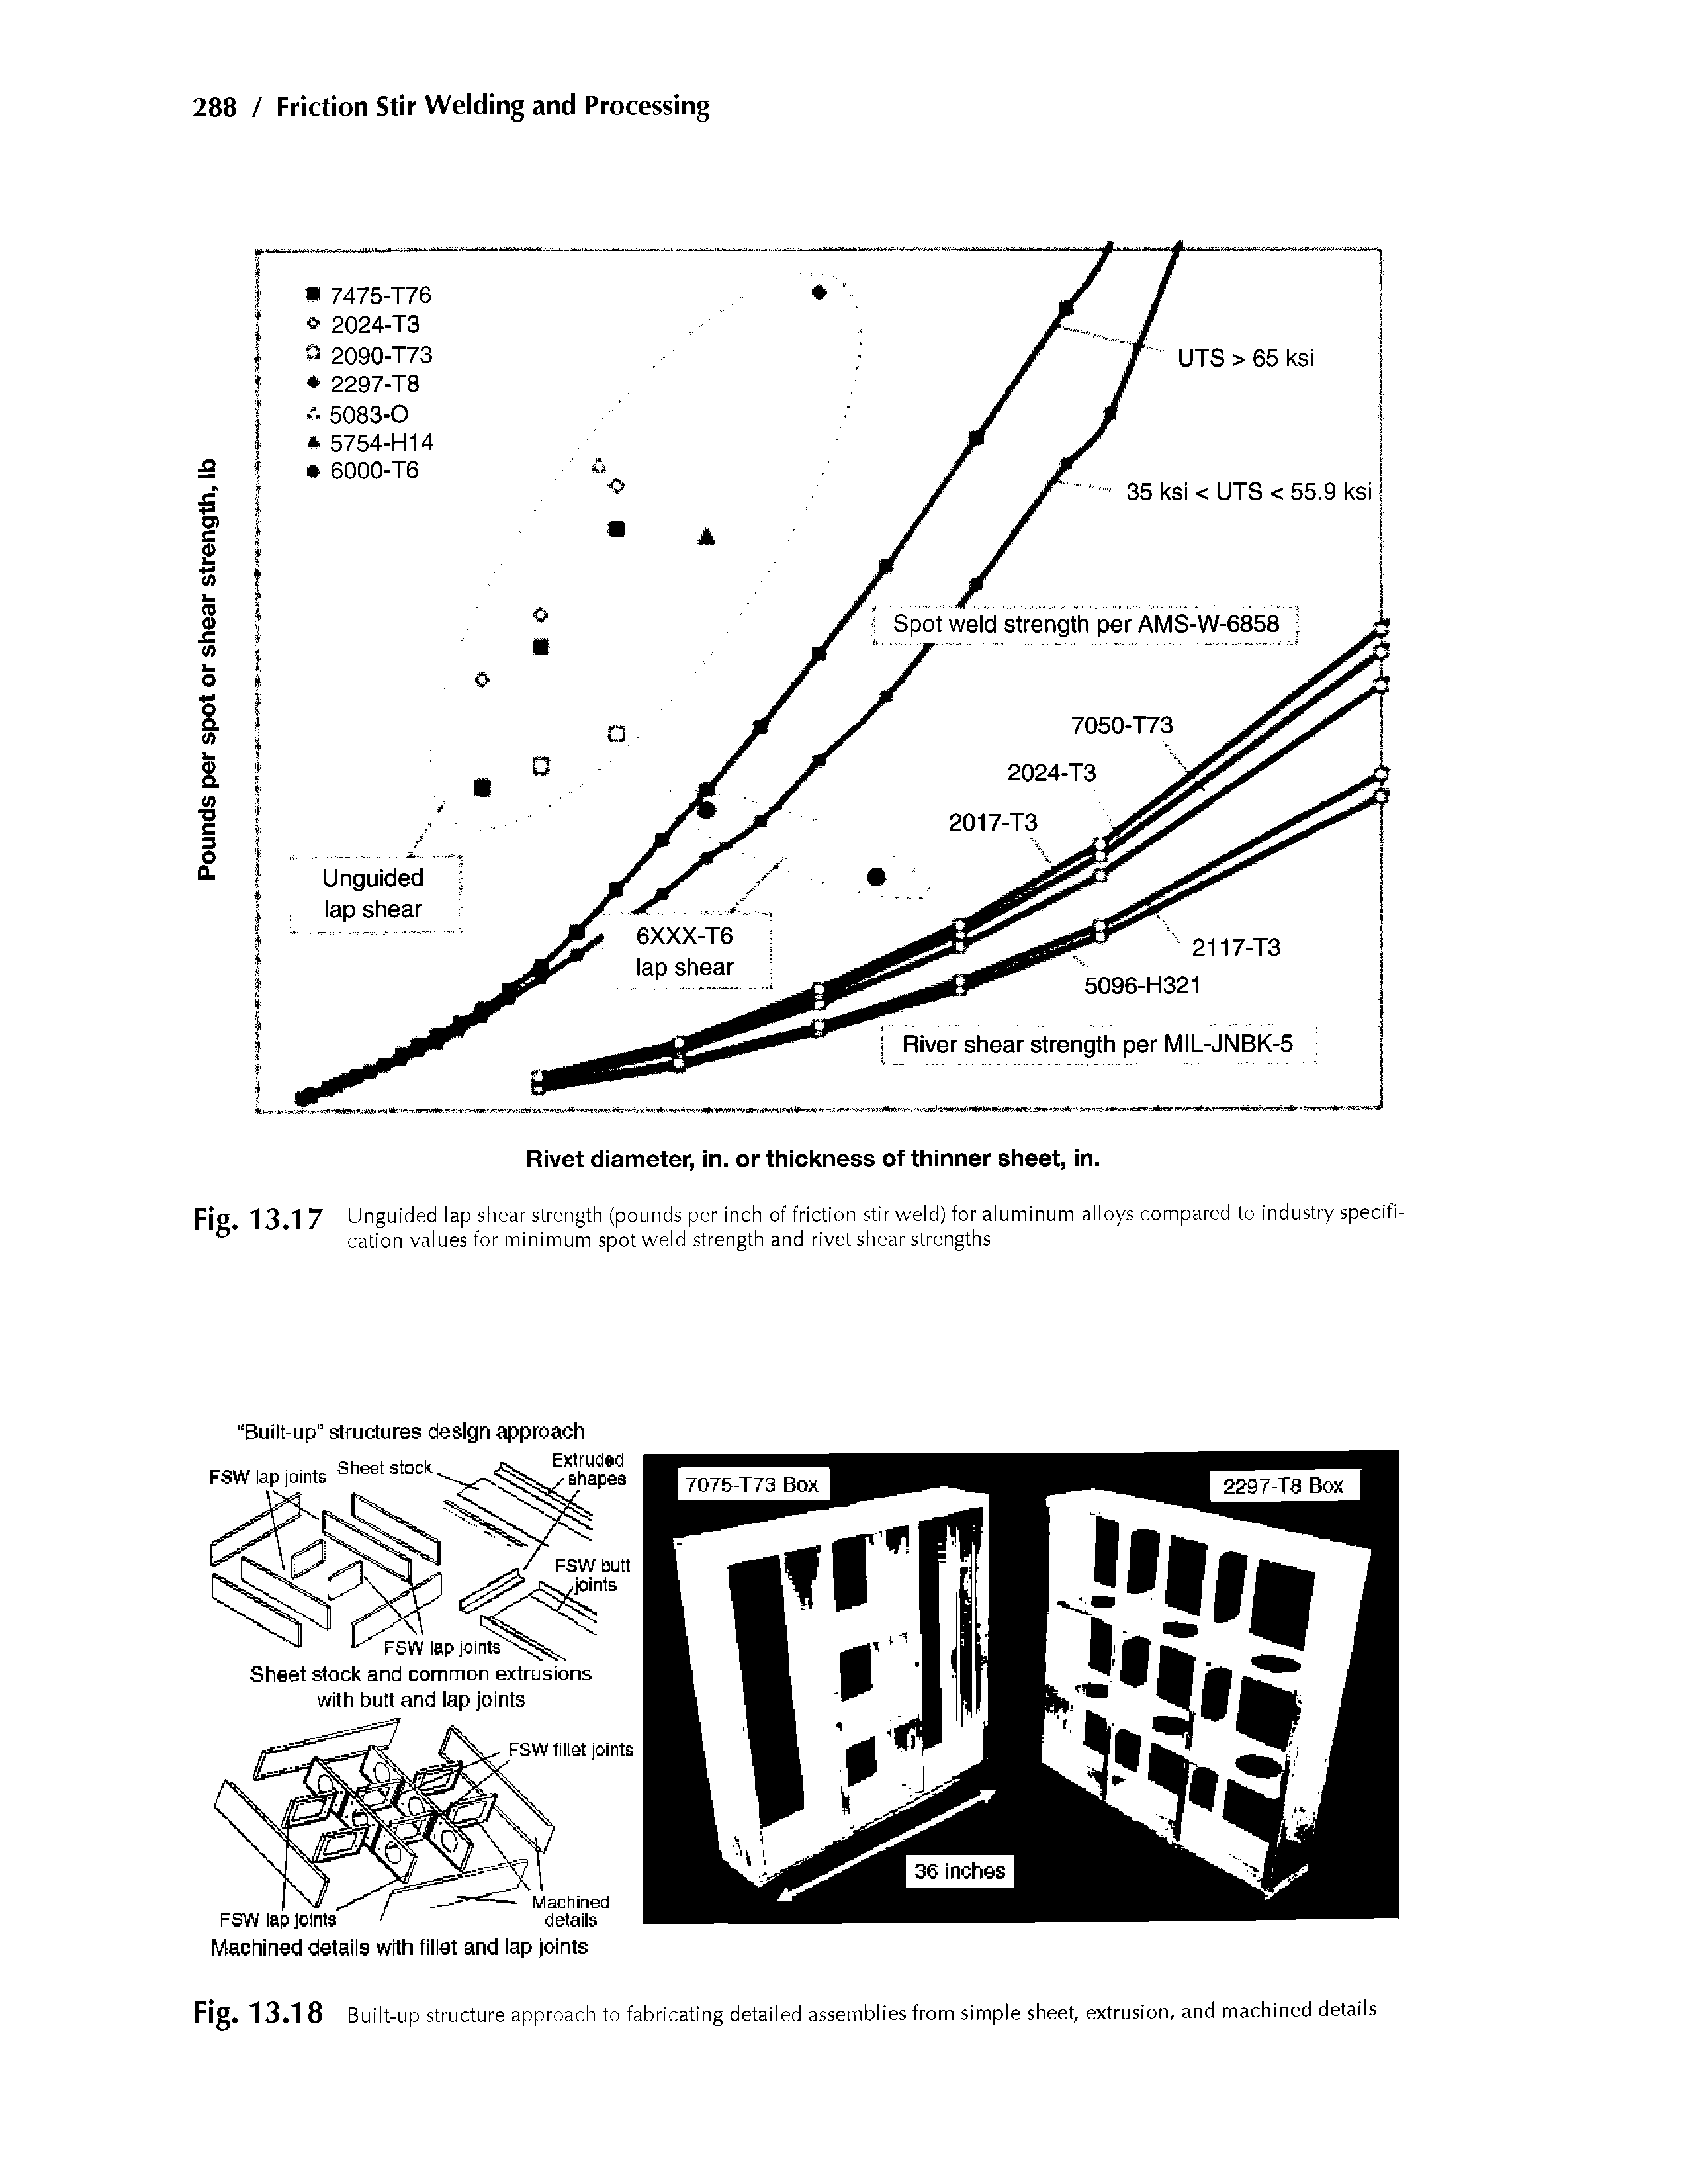 Fig. 13.17 Ungu ided lap shear strength (pounds per inch of friction stir weld) for aluminum alloys compared to industry specification values for minimum spot weld strength and rivet shear strengths...